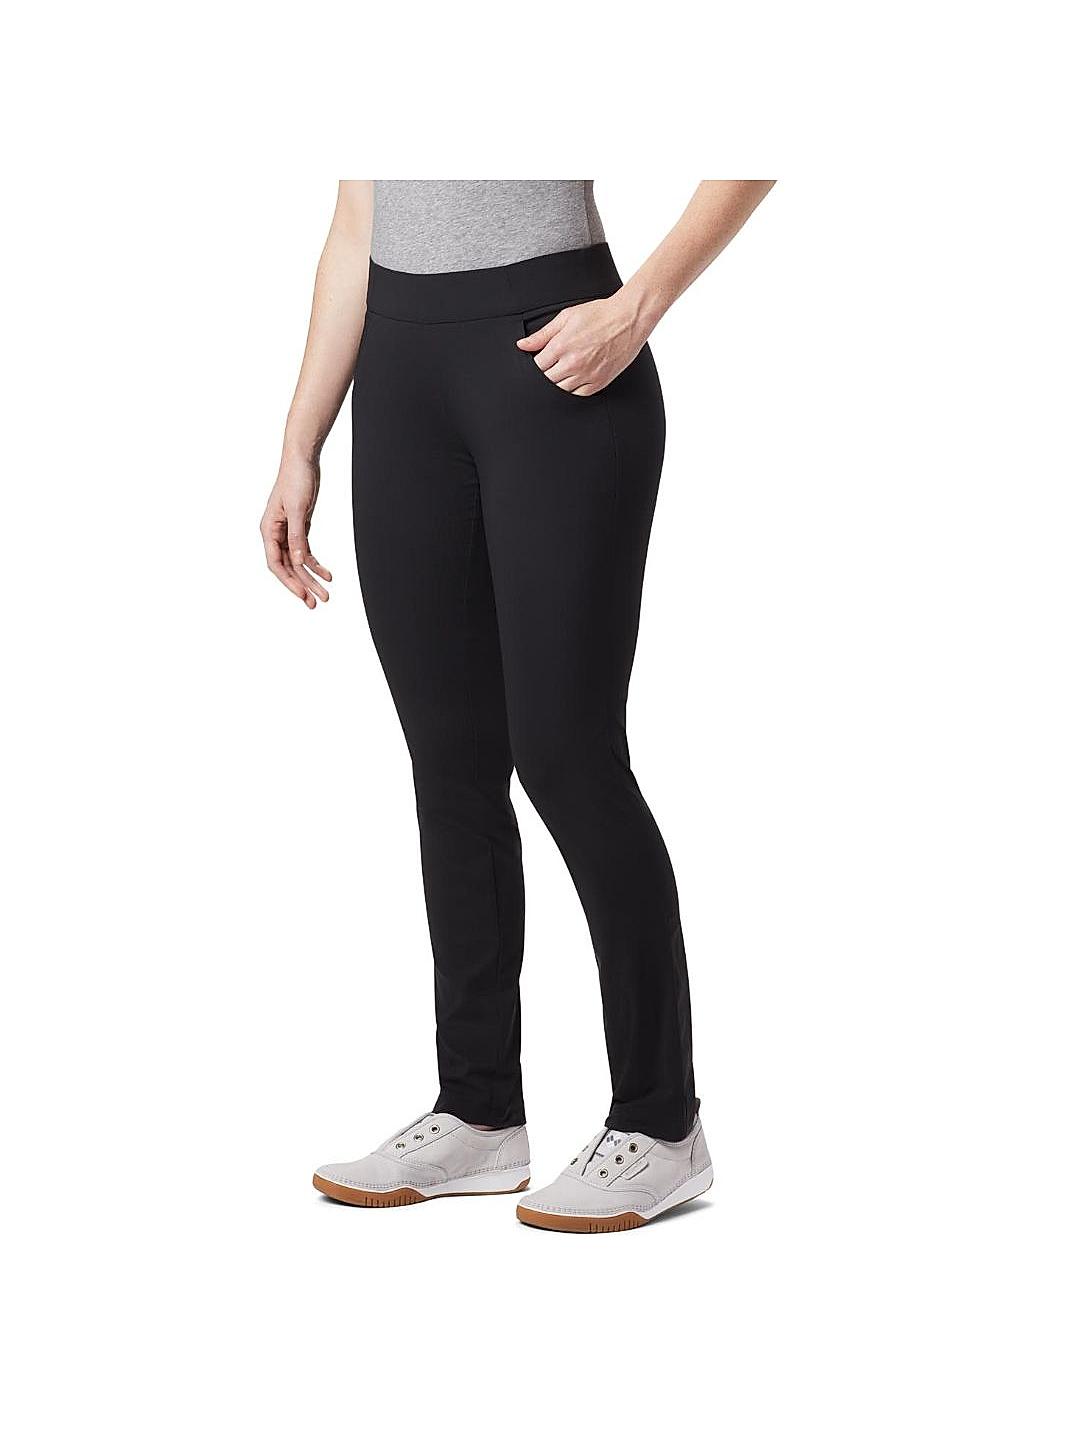 Buy Black Anytime Casual Pull On Pant for Women Online at Columbia